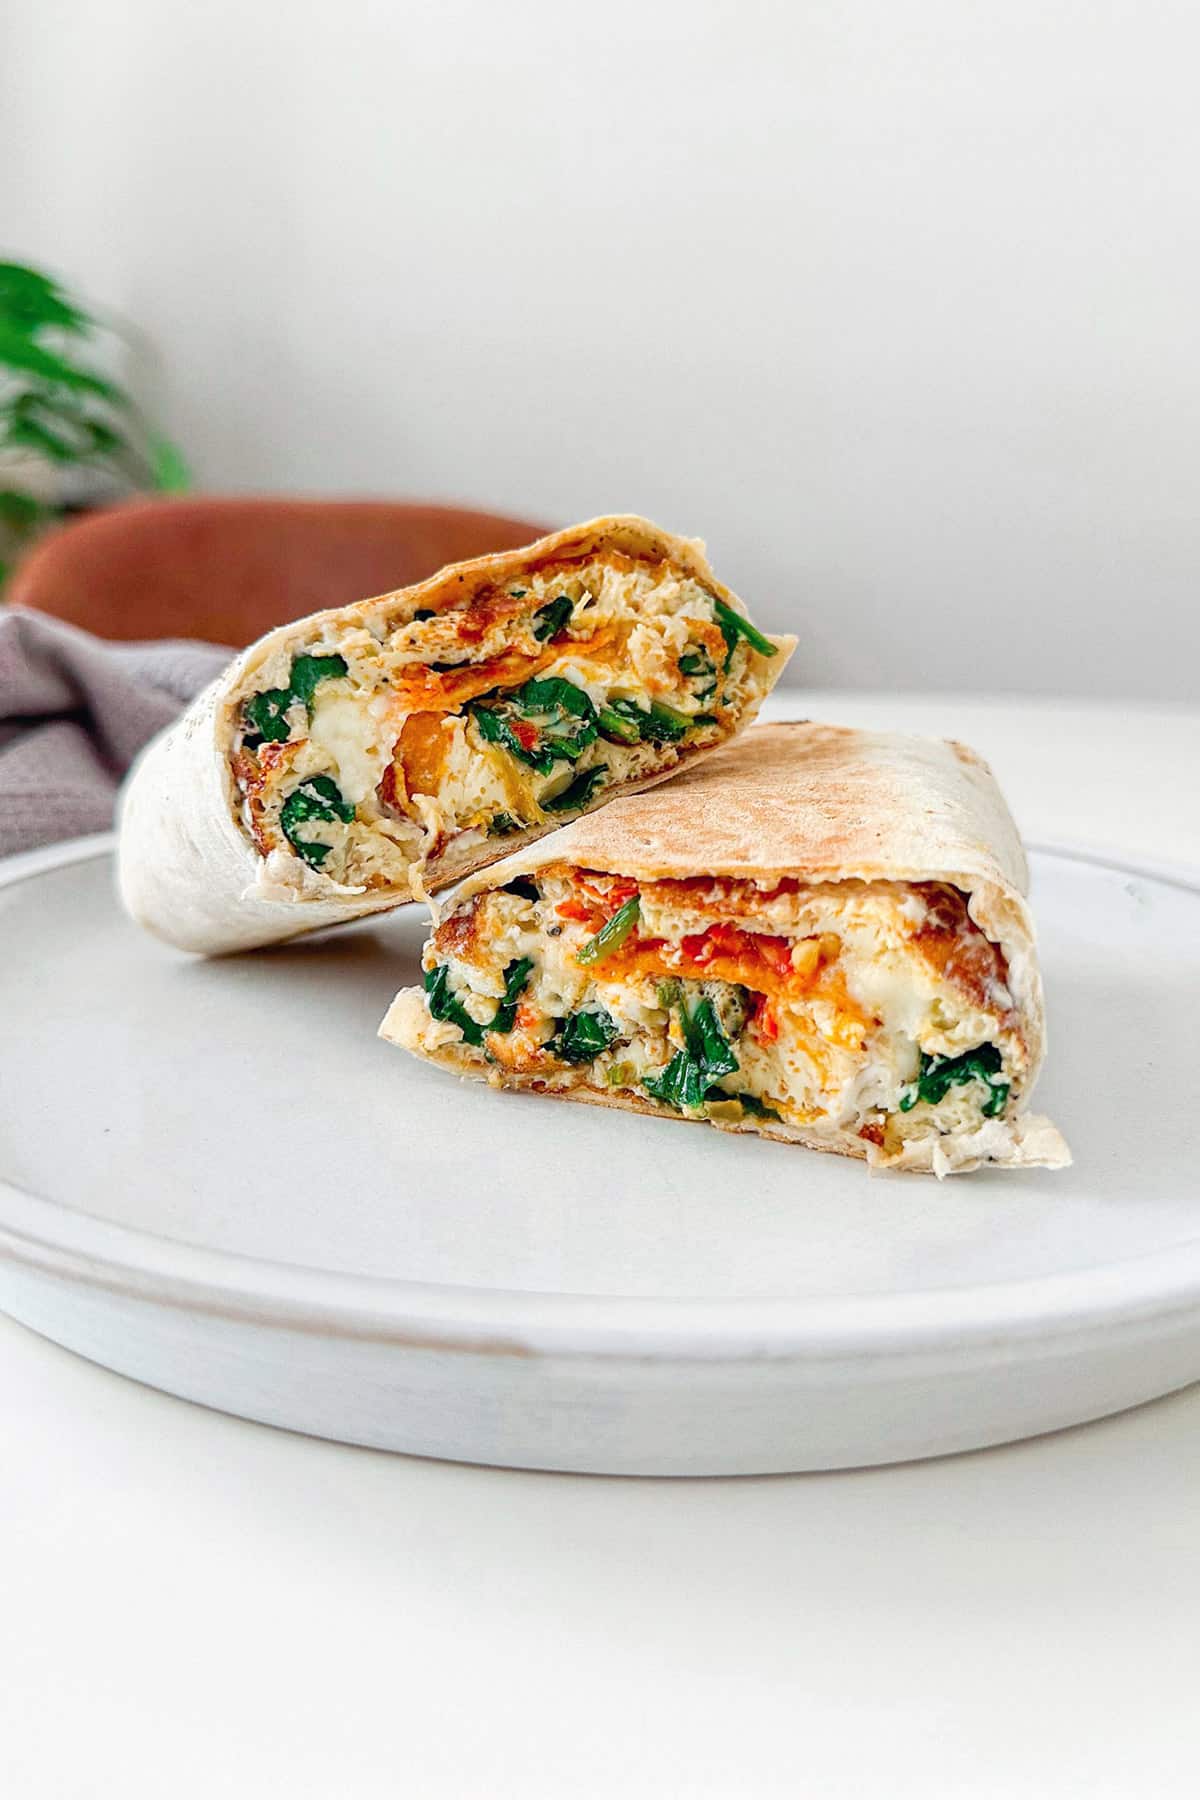 Healthy Spinach and Feta Breakfast Wrap: A Perfect Saturday Morning Delight